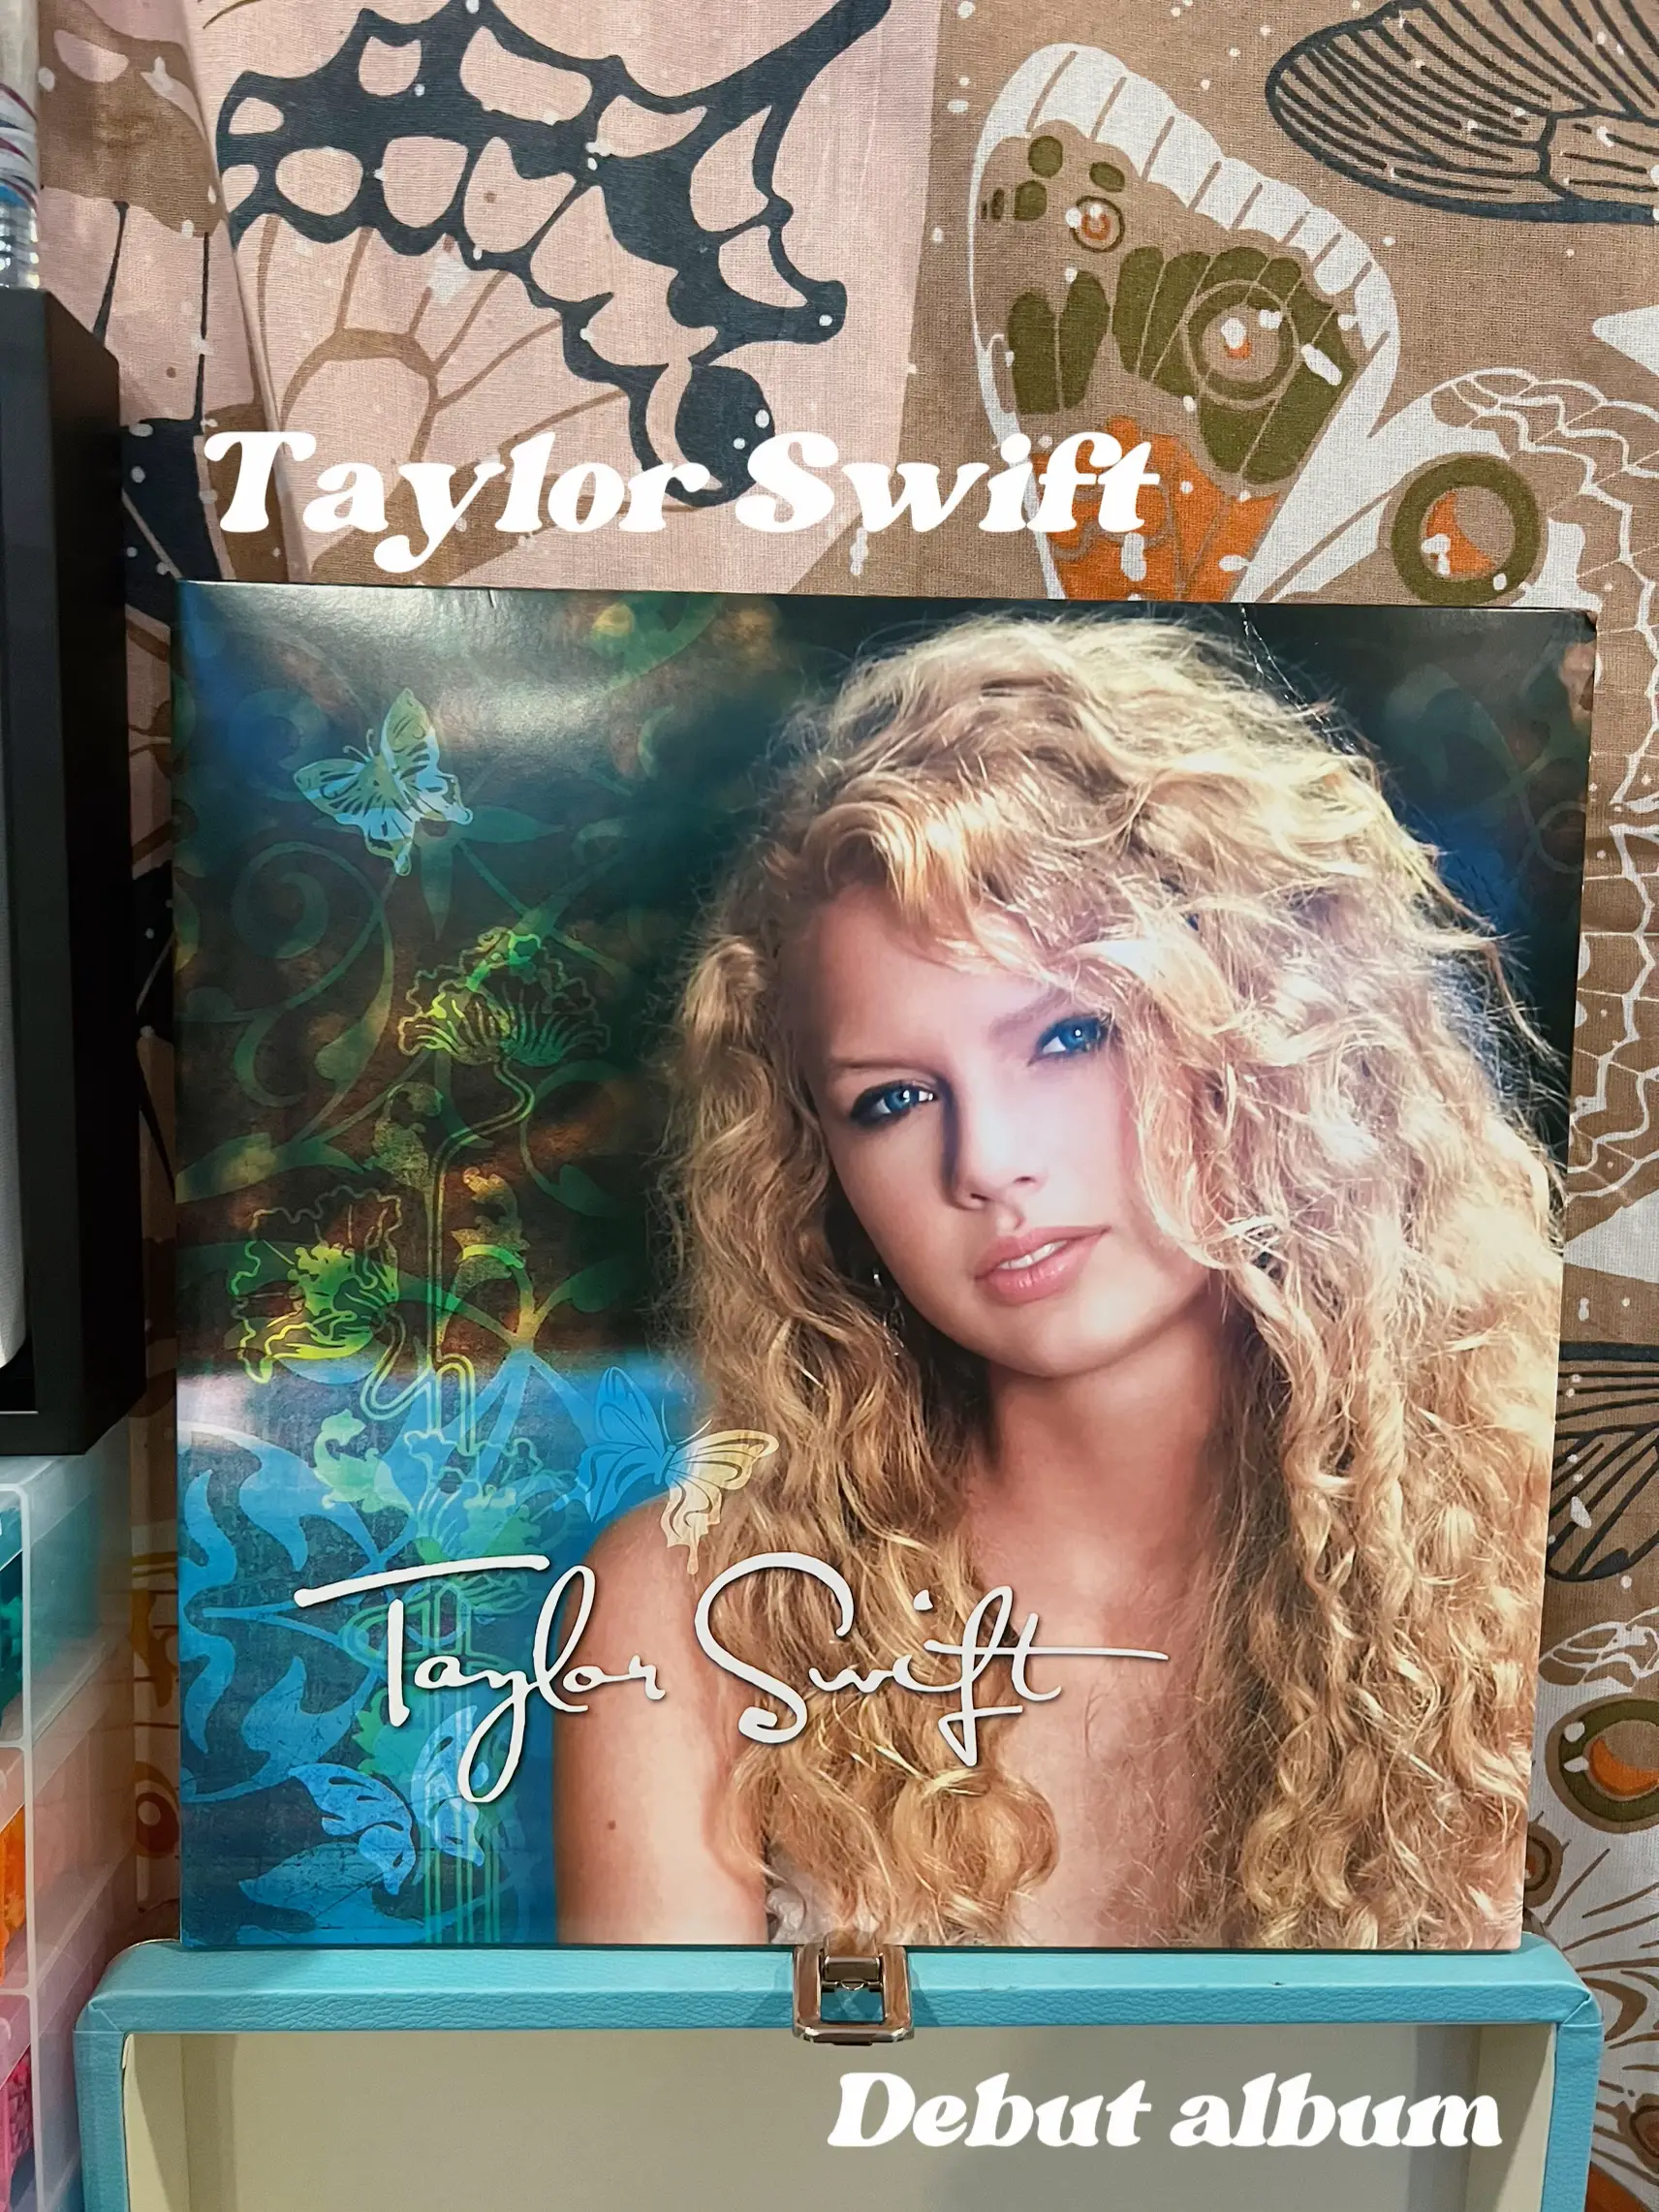 My 1989 vinyl finally came in the post, a TSwift record collection